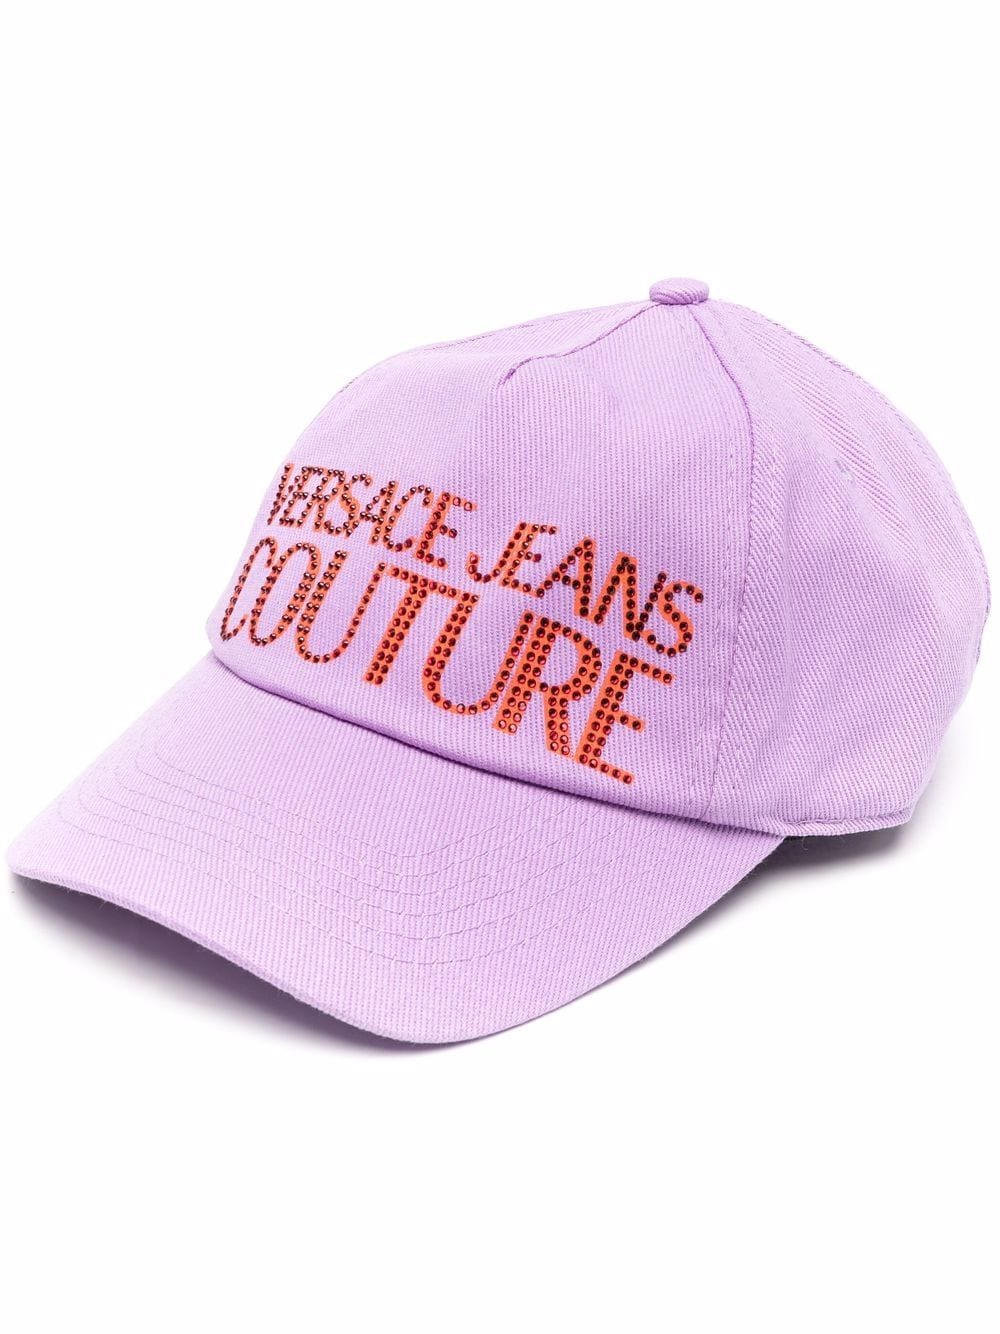 Versace Jeans Couture embellished logo baseball cap - Purple von Versace Jeans Couture